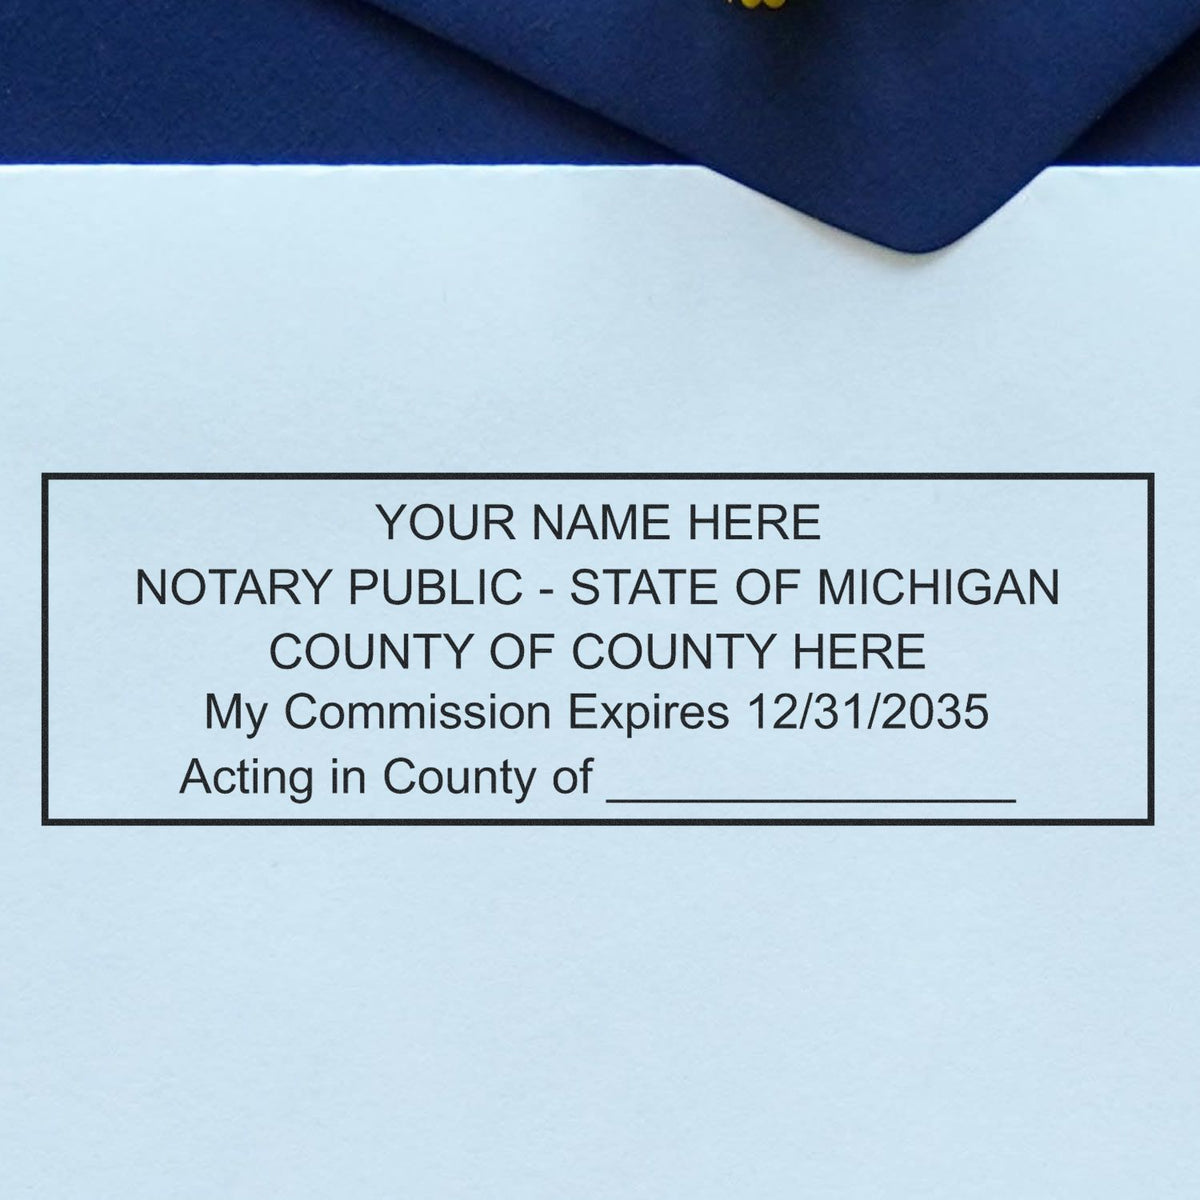 A lifestyle photo showing a stamped image of the Heavy-Duty Michigan Rectangular Notary Stamp on a piece of paper